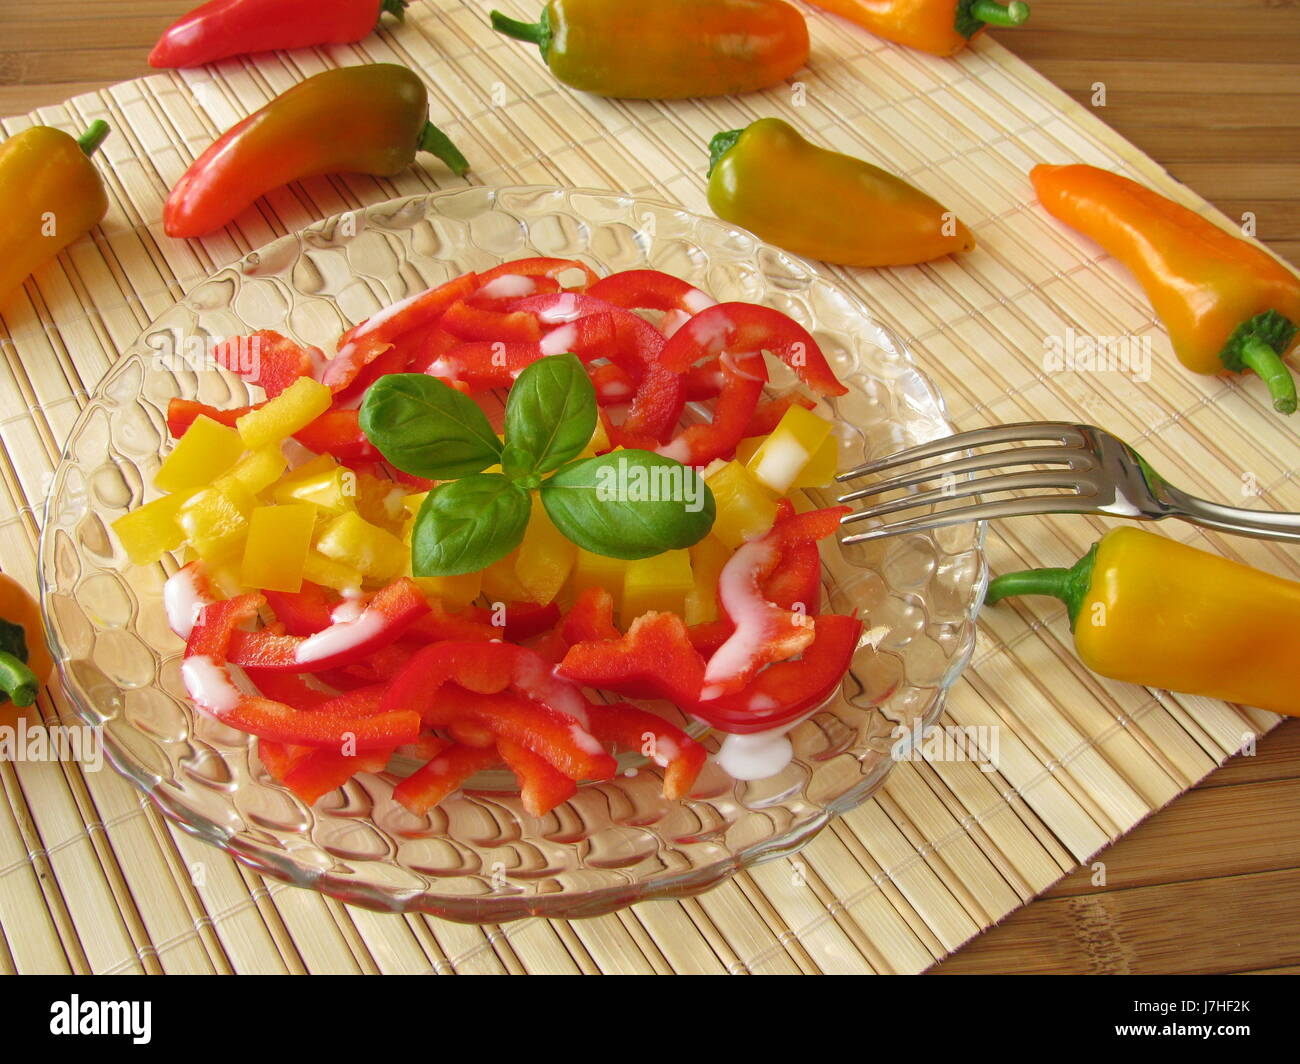 vegetable salad with peppers Stock Photo